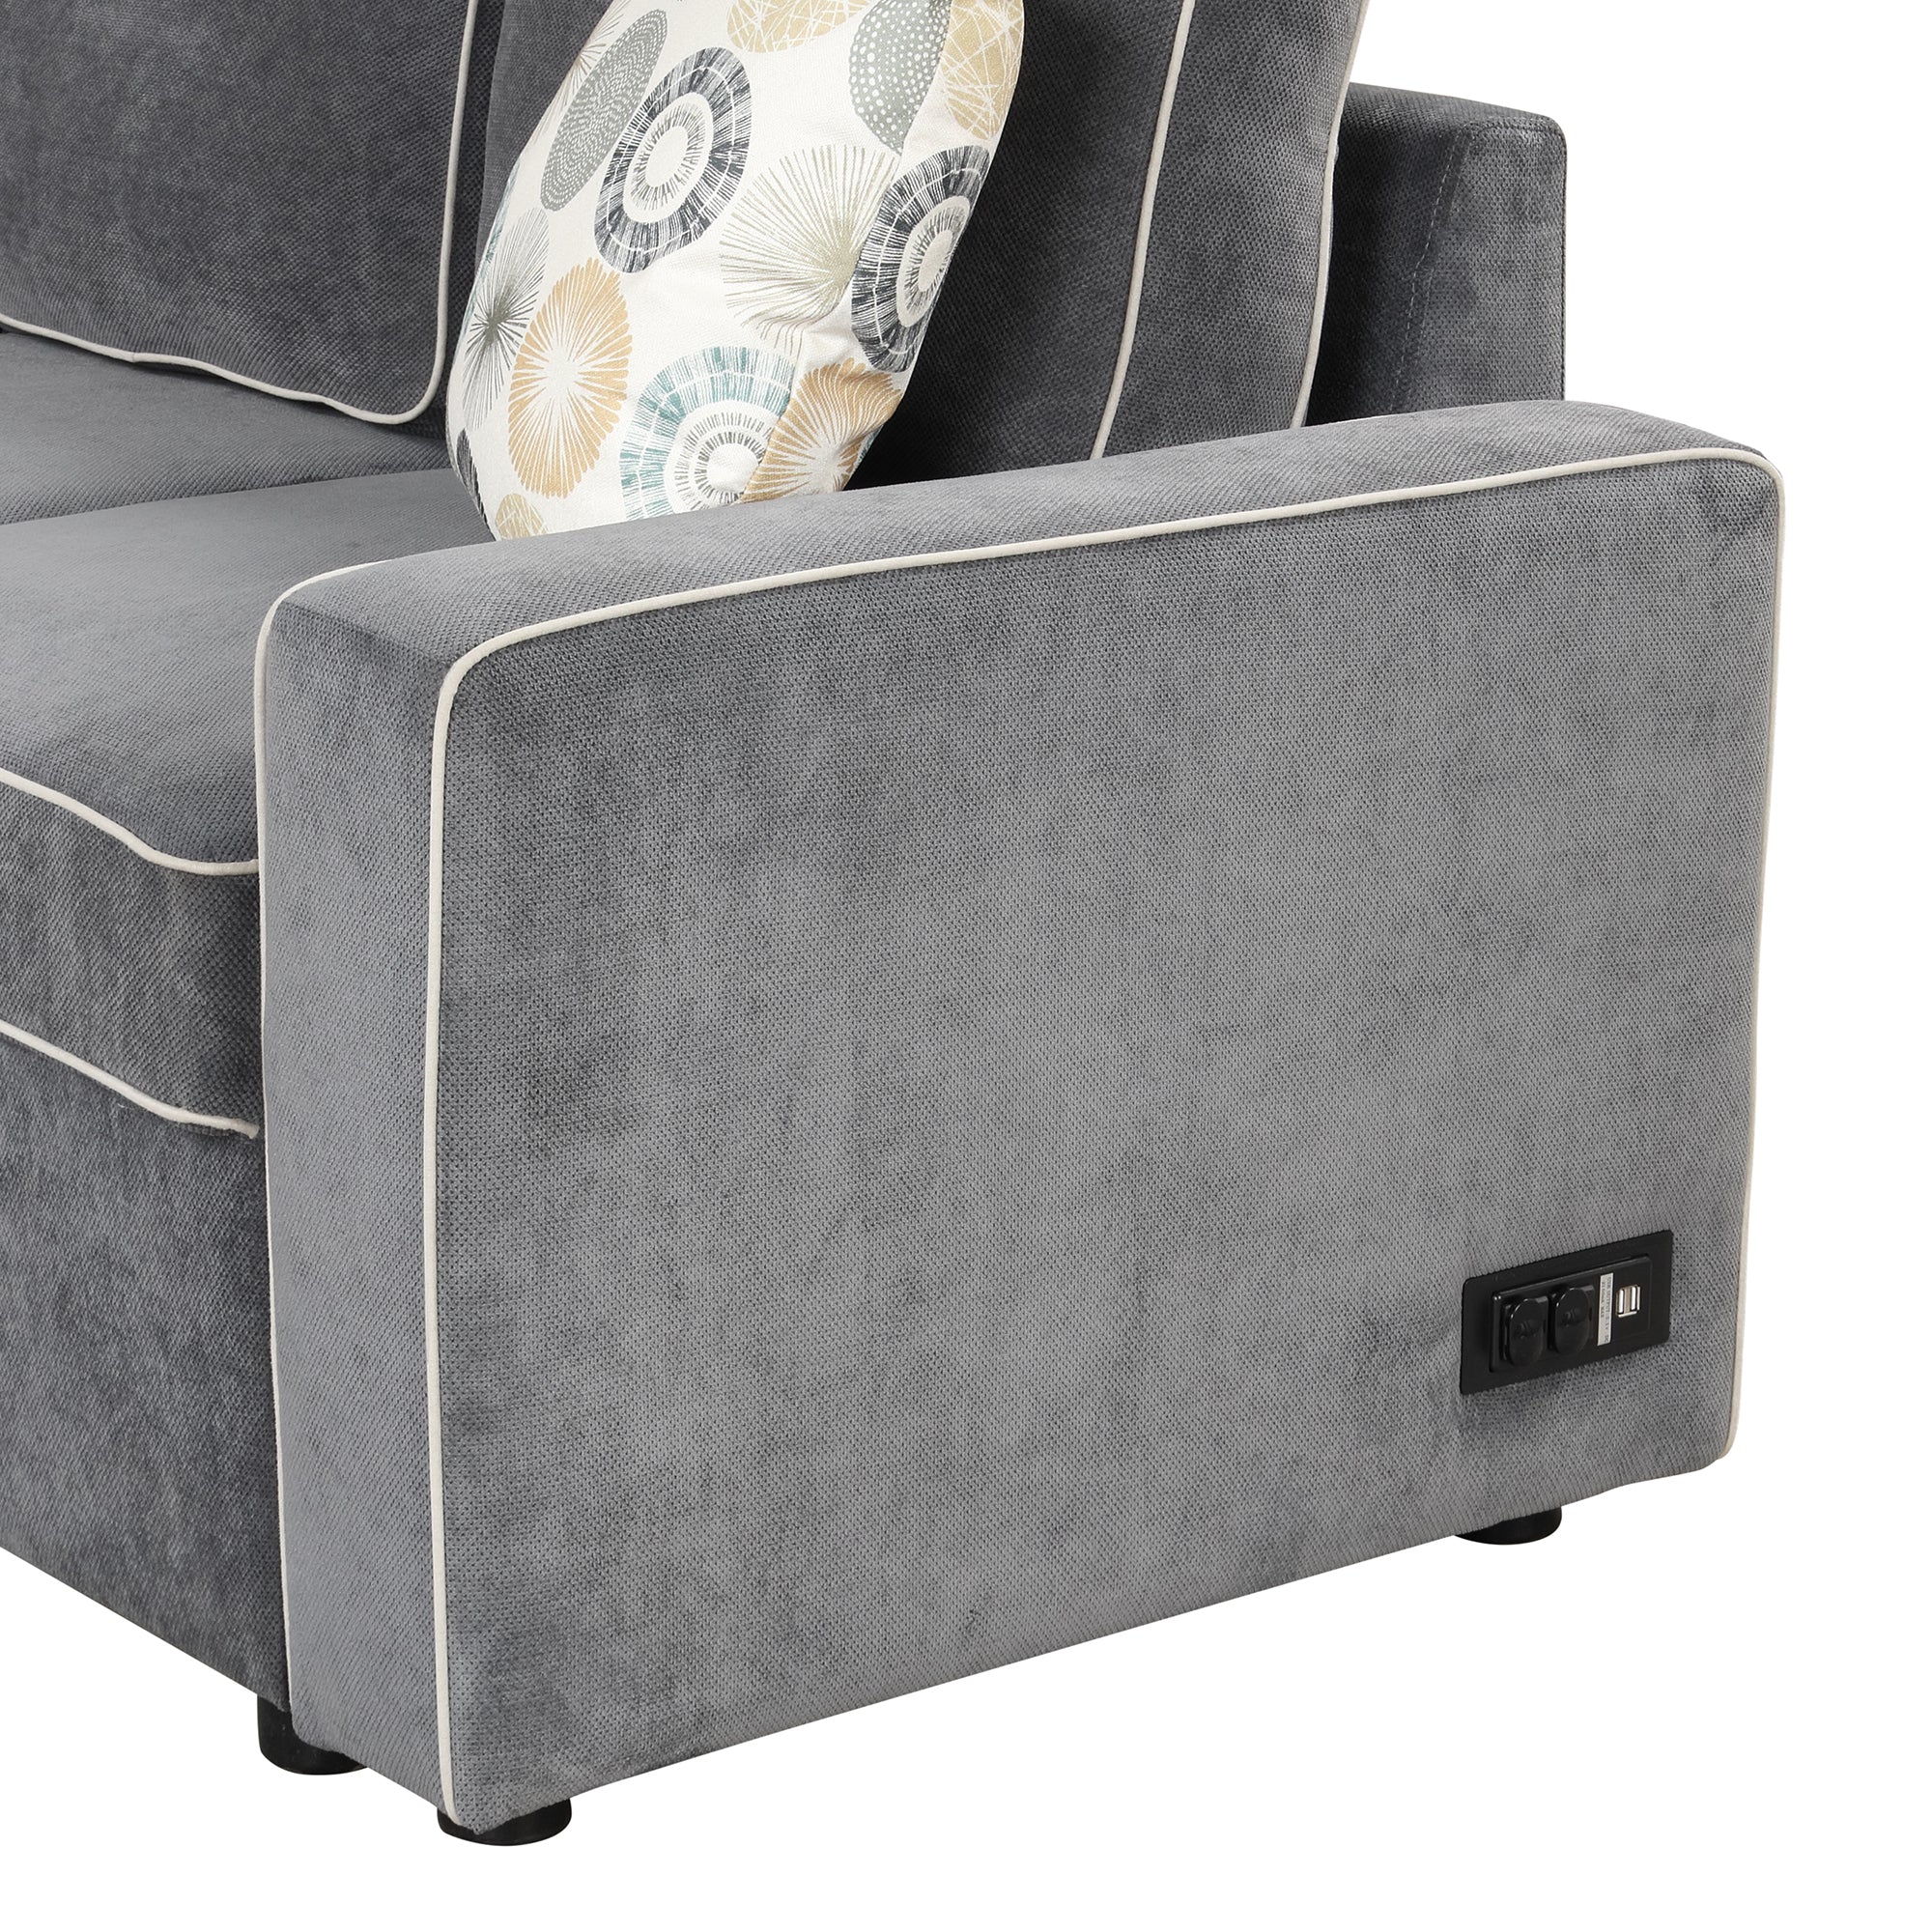 L-Shaped Sleeper Sectional Sofa - Gray with USB & Power-Sleeper Sectionals-American Furniture Outlet